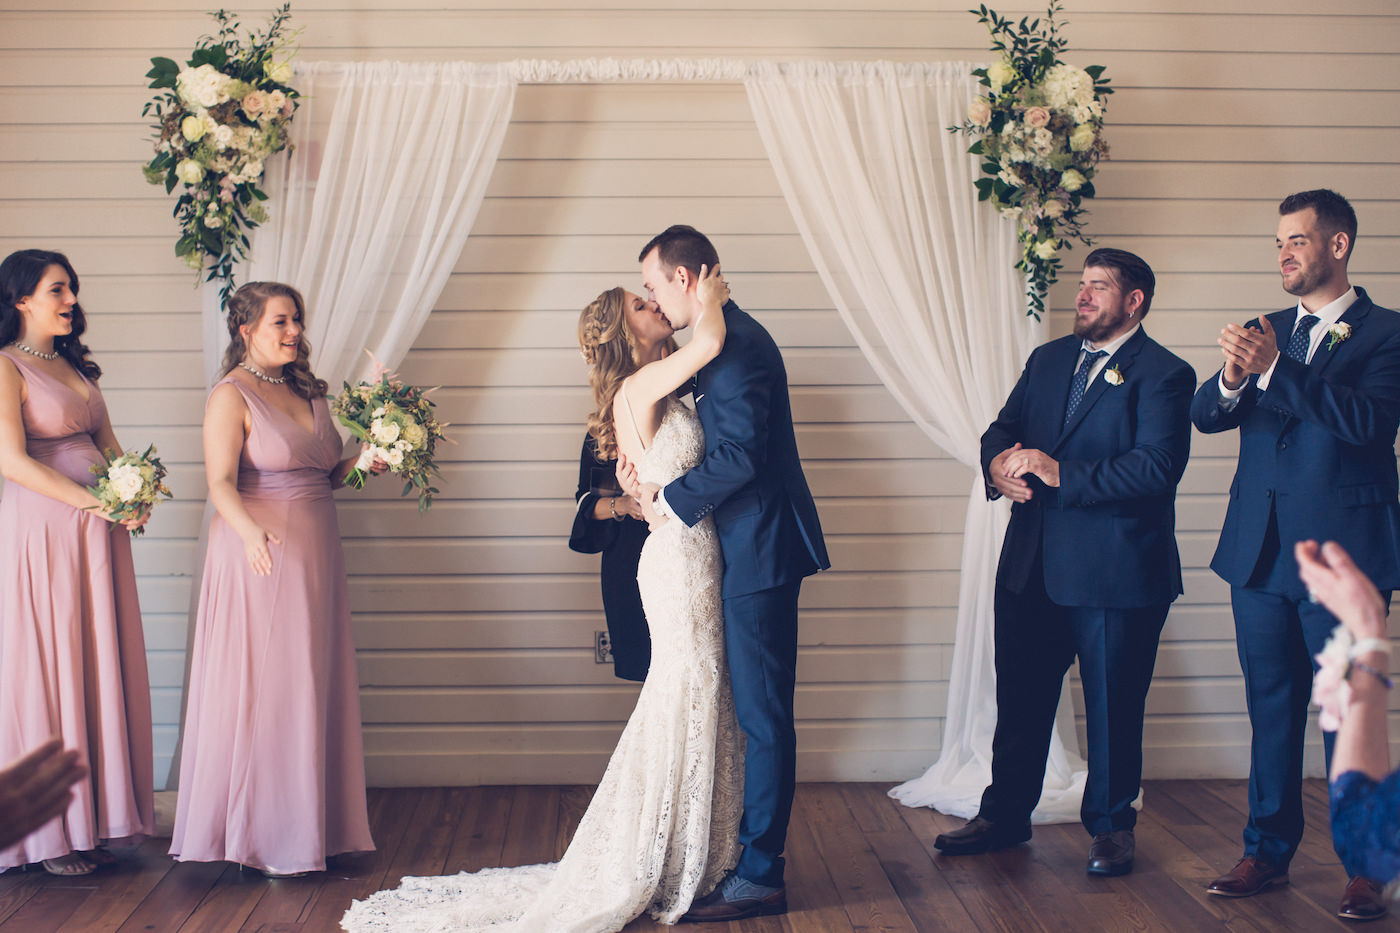 Bride and Groom First Kiss at Tampa Historic Venue with Pipe and Drape Backdrop and White and Blush Pink Rose and Greenery Floral Arrangements | Dusty Rose Bridesmaid Dresses and Navy Blue Groomsmen Suits | Tampa Wedding Photographer Luxe Light Images